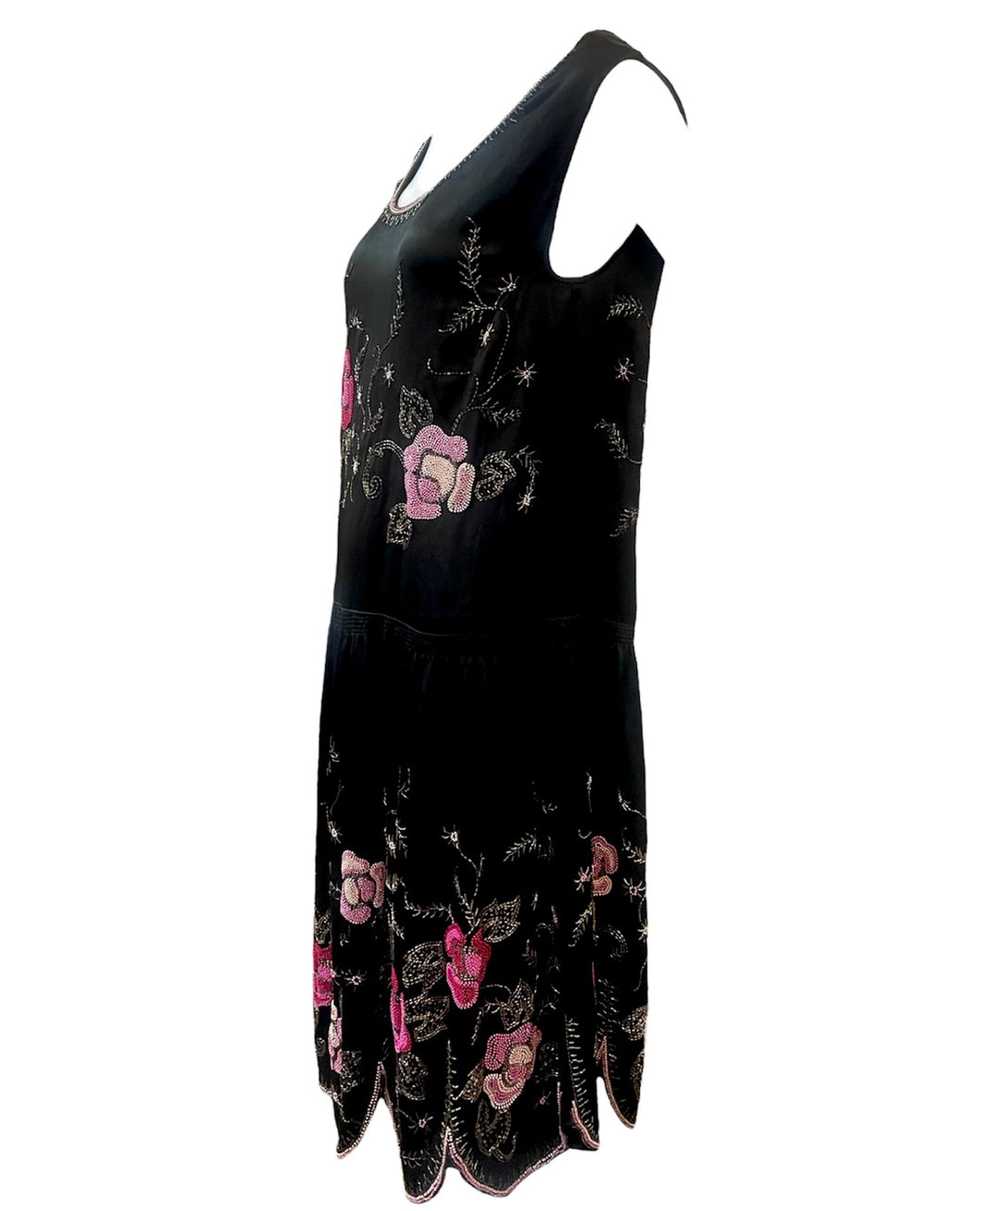 20s Satin Floral Beaded Dress with Scallop Hem - image 4